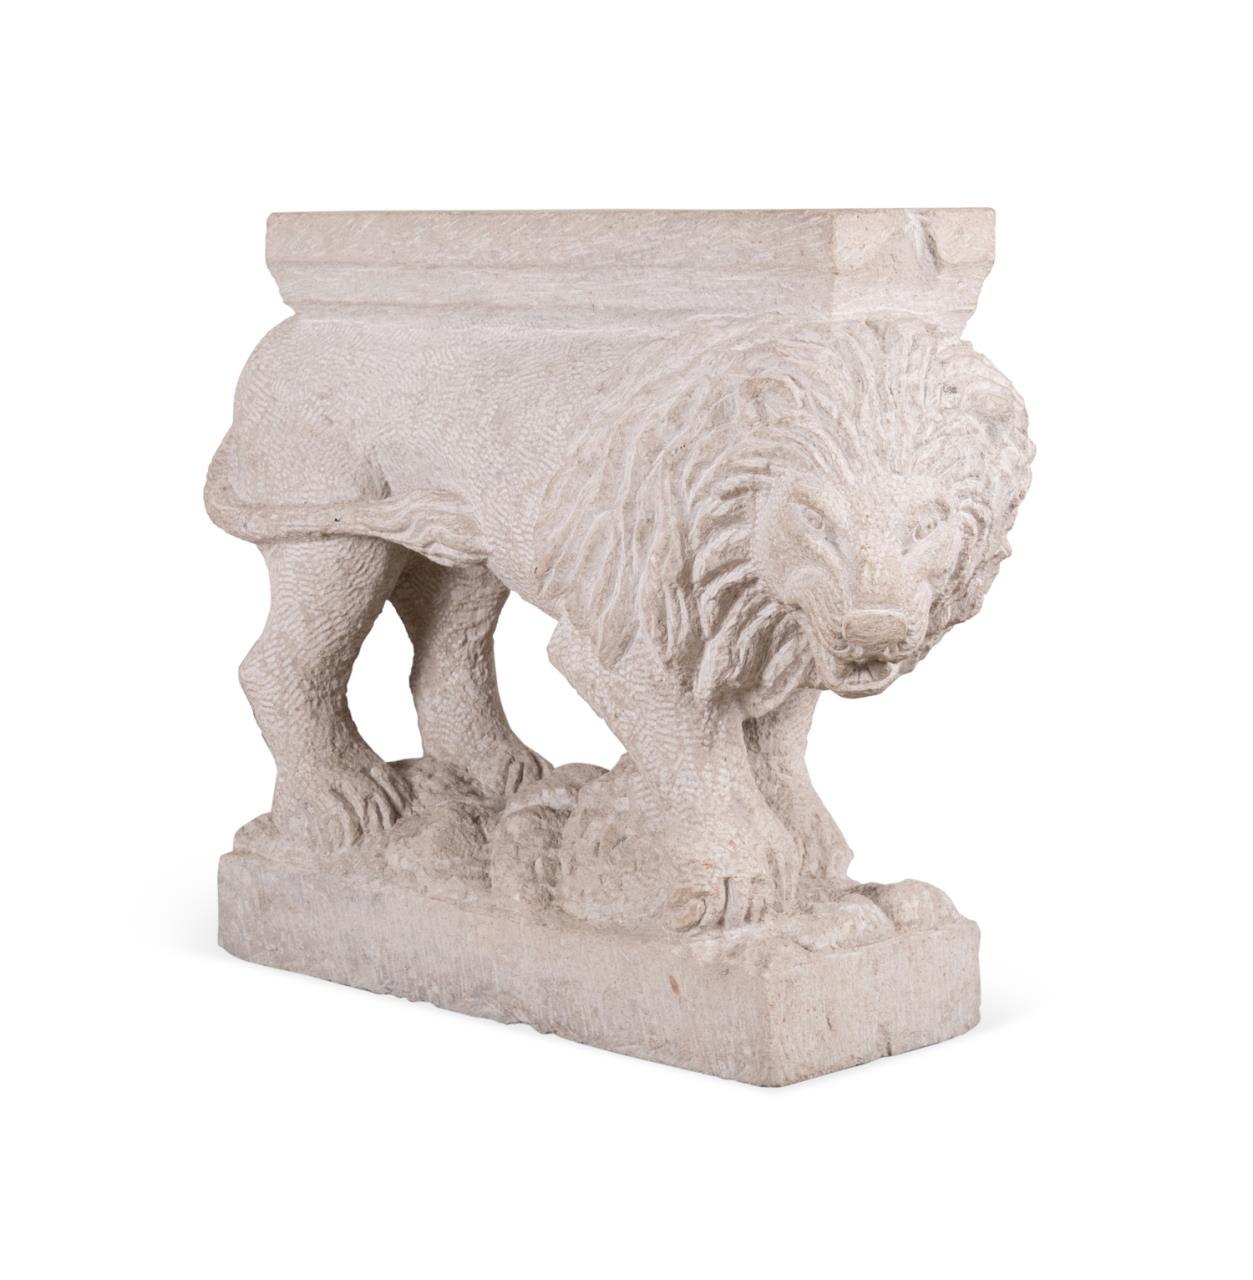 MEDIEVAL STYLE CARVED STONE LION 2fa5e5